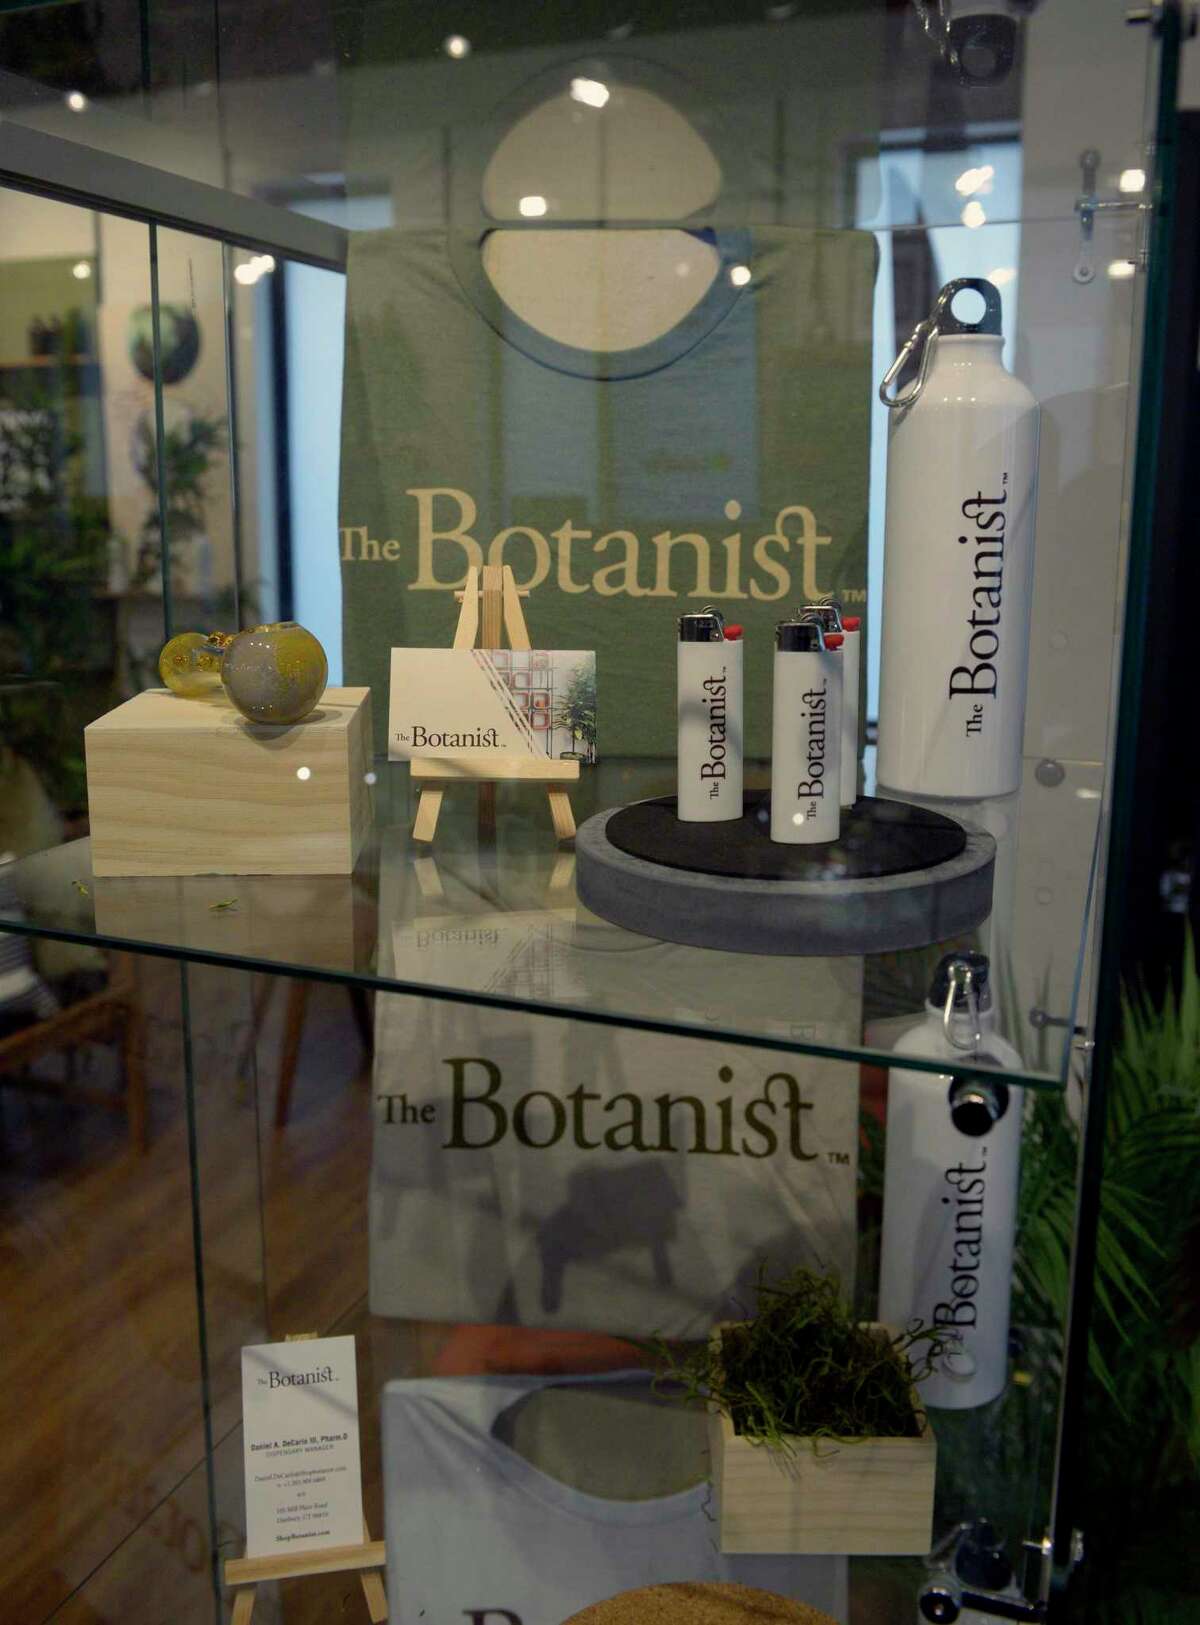 The Botanist, the new medical marijuana dispensary on Mill Plain Road, held an opening ceremony on October 13, 2021, in Danbury, Conn.